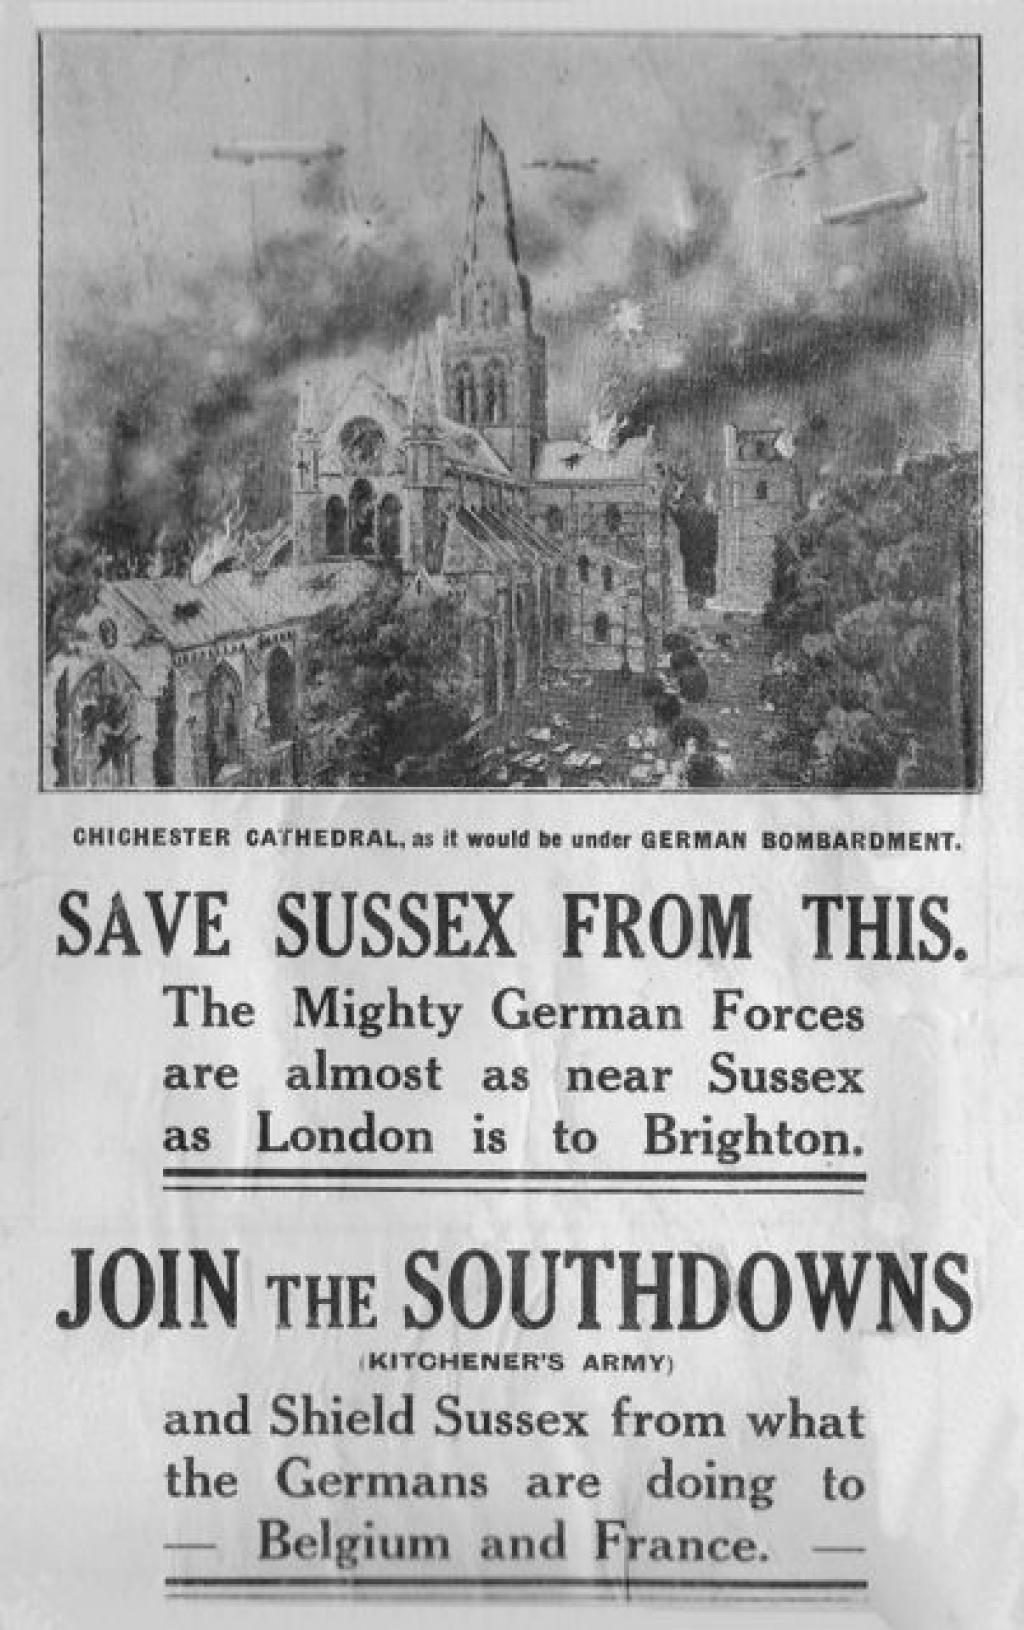 News Paper headline: Save Sussex From This. Seaford Museum & East Sussex WW1